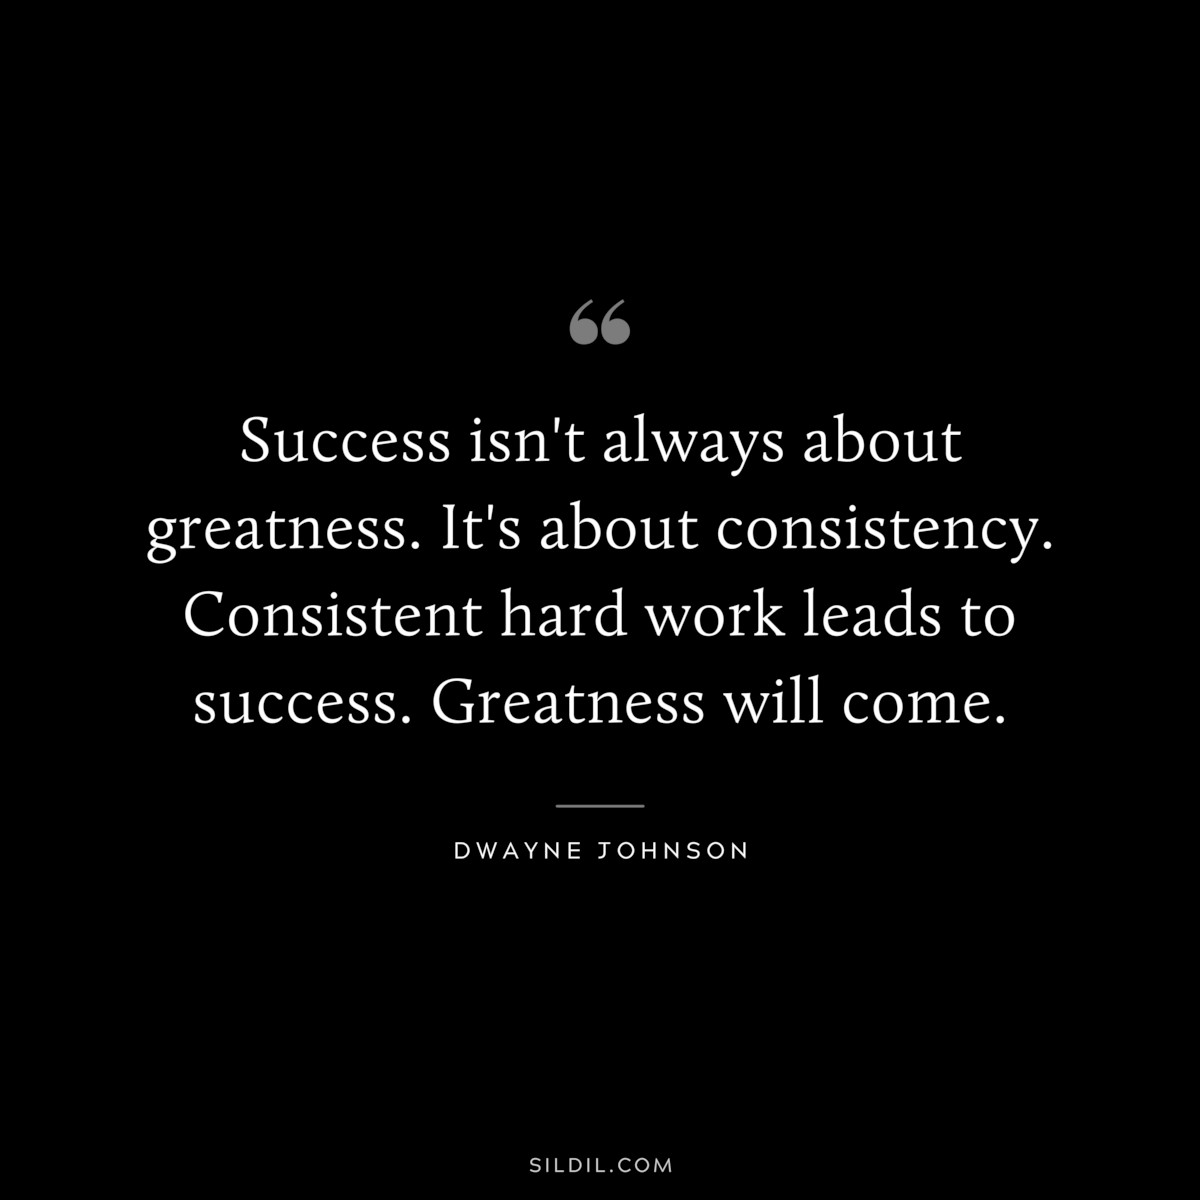 Success isn't always about greatness. It's about consistency. Consistent hard work leads to success. Greatness will come. ― Dwayne Johnson